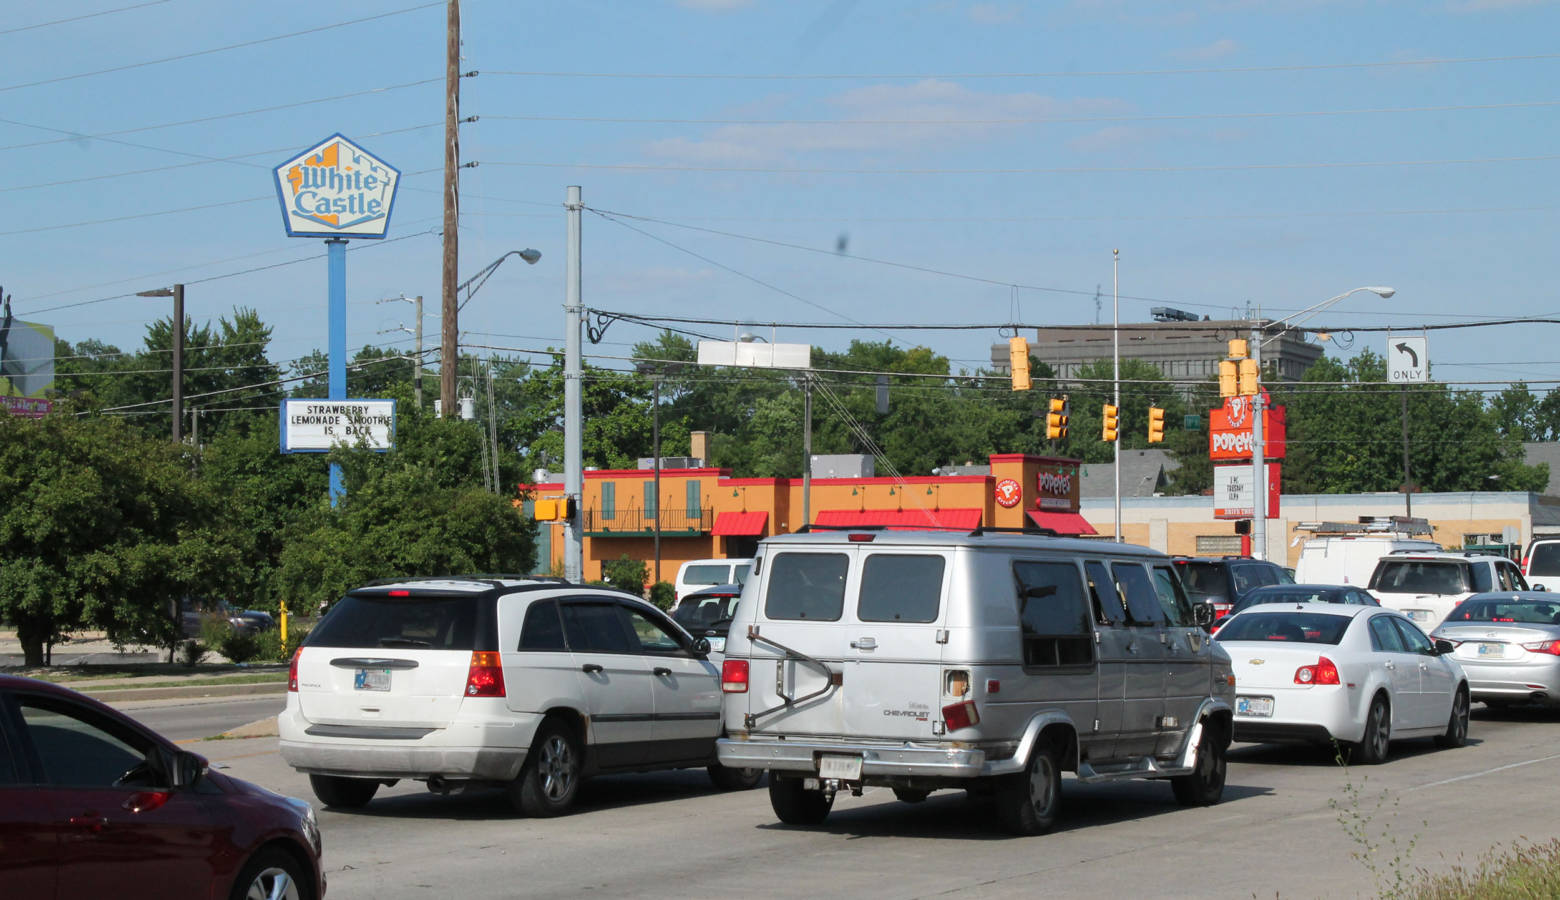 The corner of 38th Street and Keystone Avenue is lined with fast food options. (Lauren Chapman/IPB News)